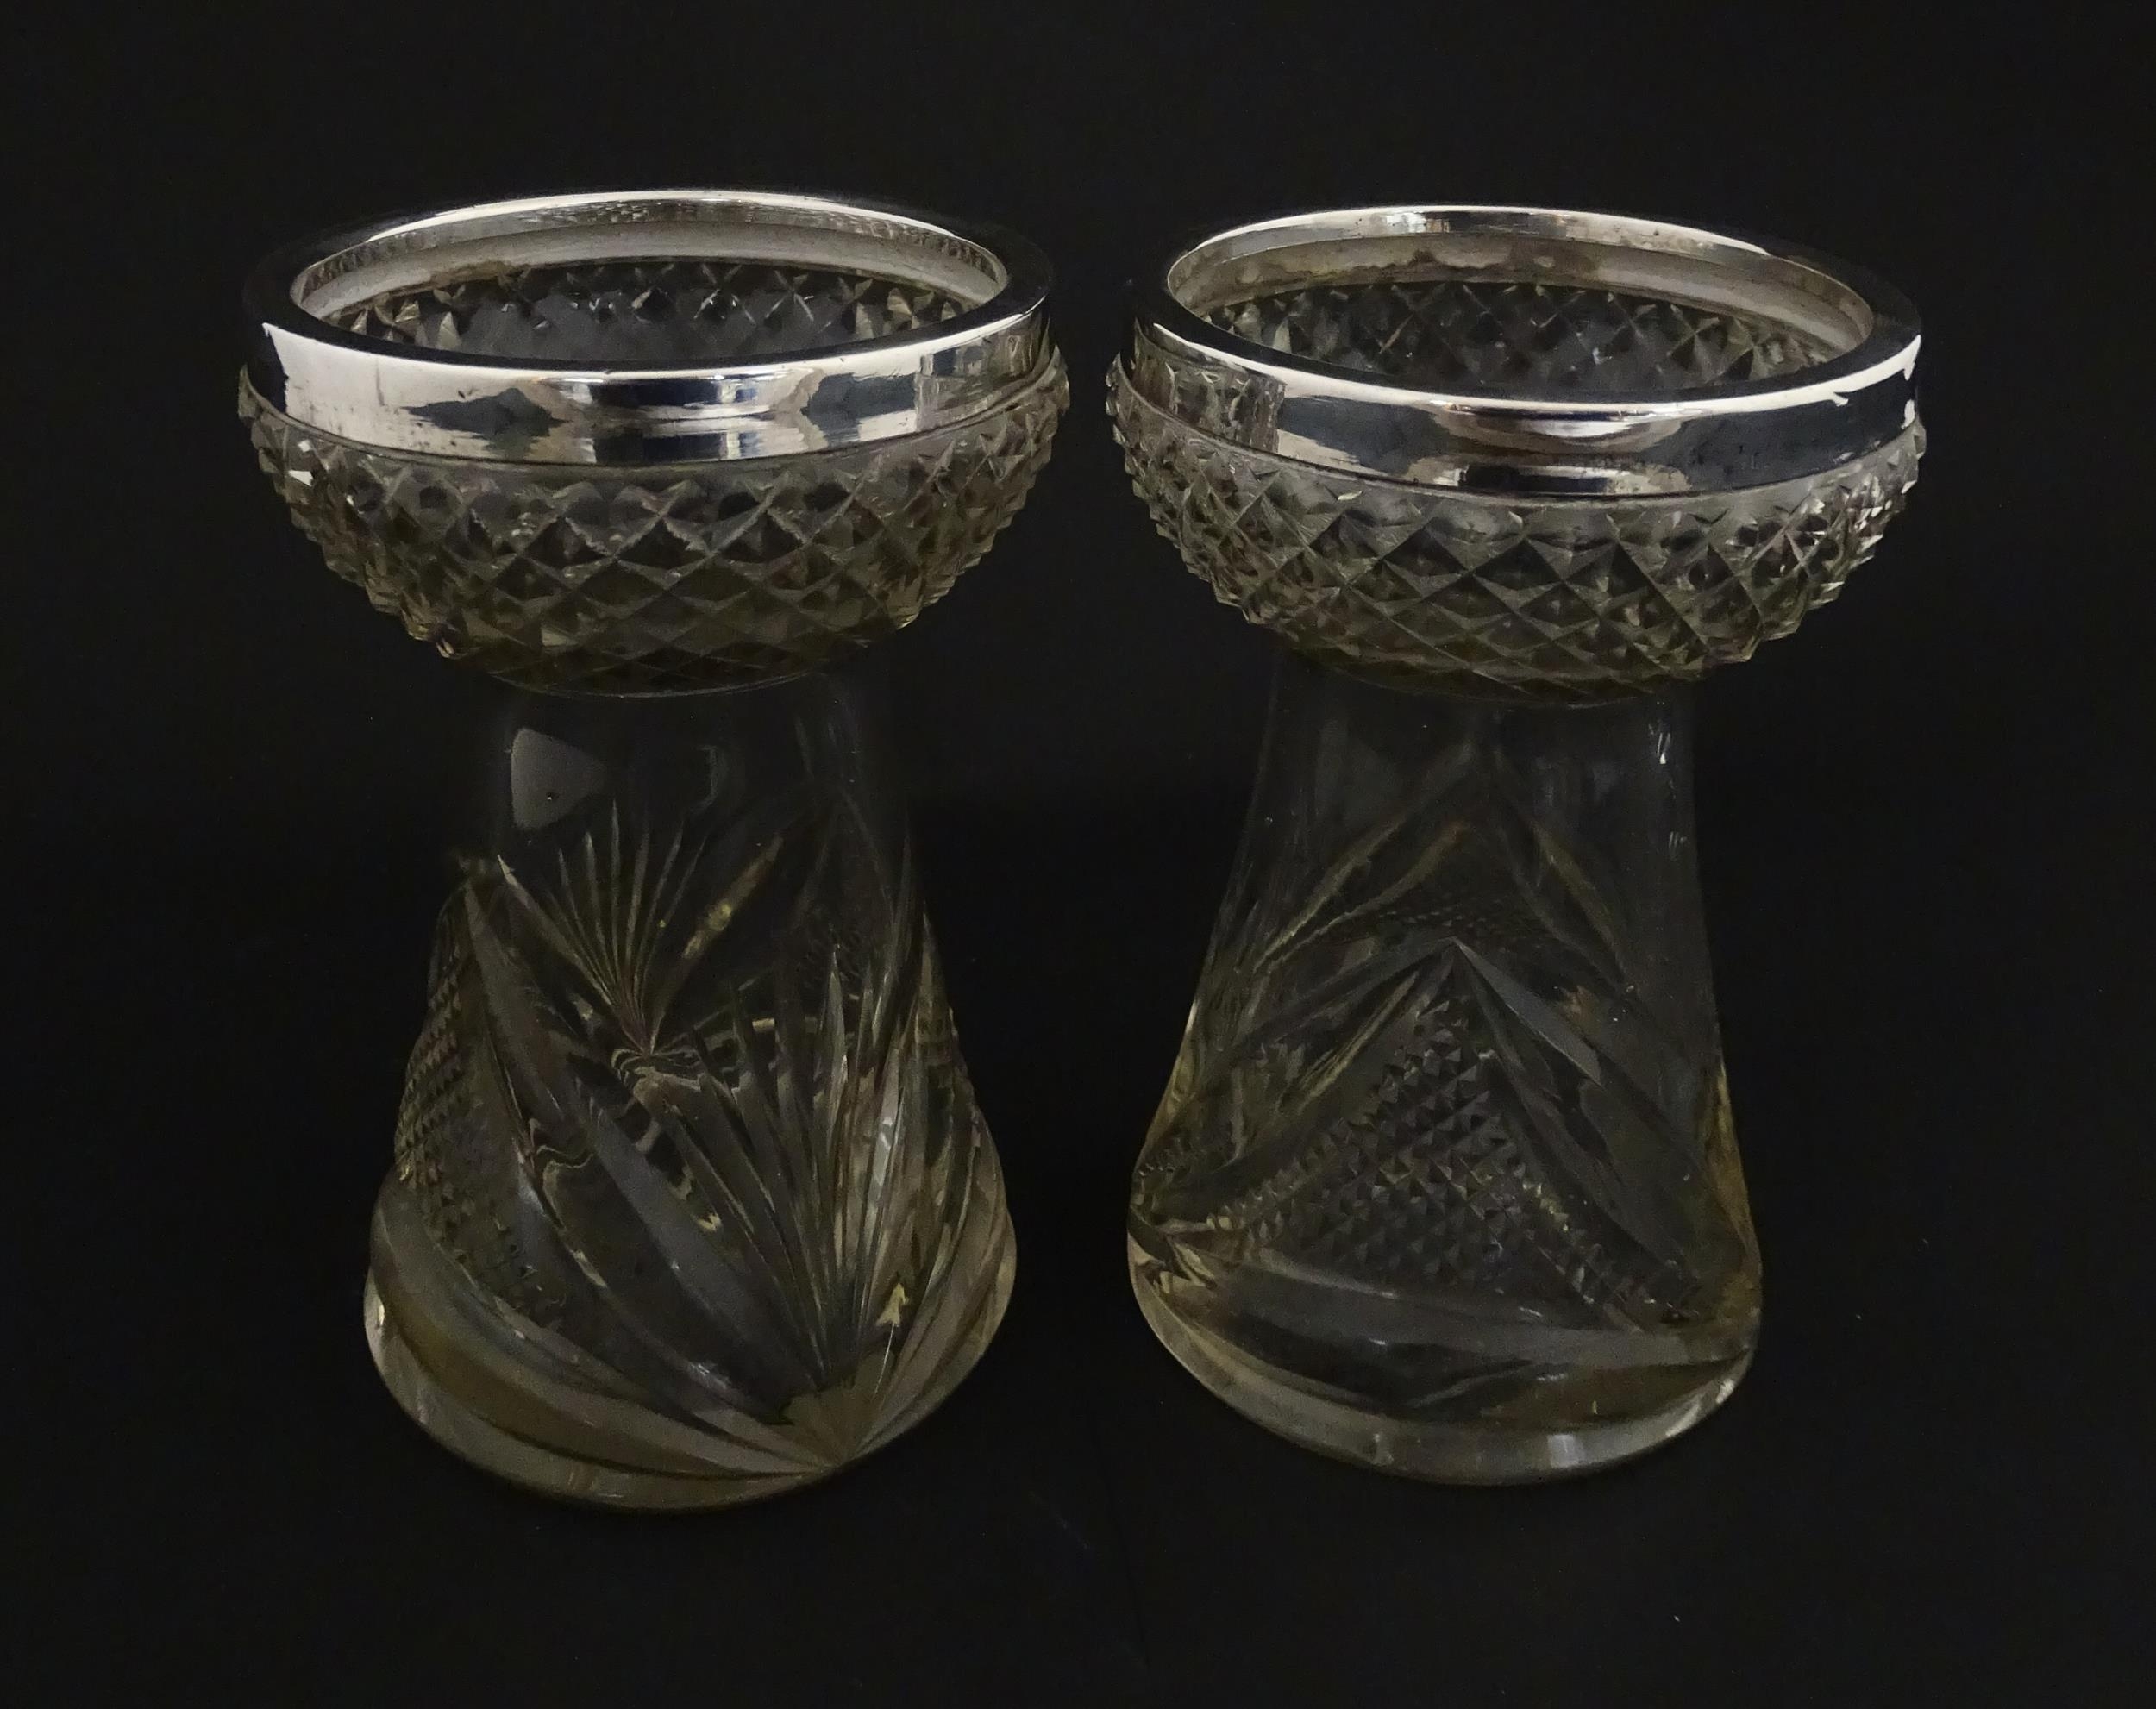 A pair of cut glass vases with silver rims in the style of hyacinth vases, hallmarked Birmingham - Image 6 of 10